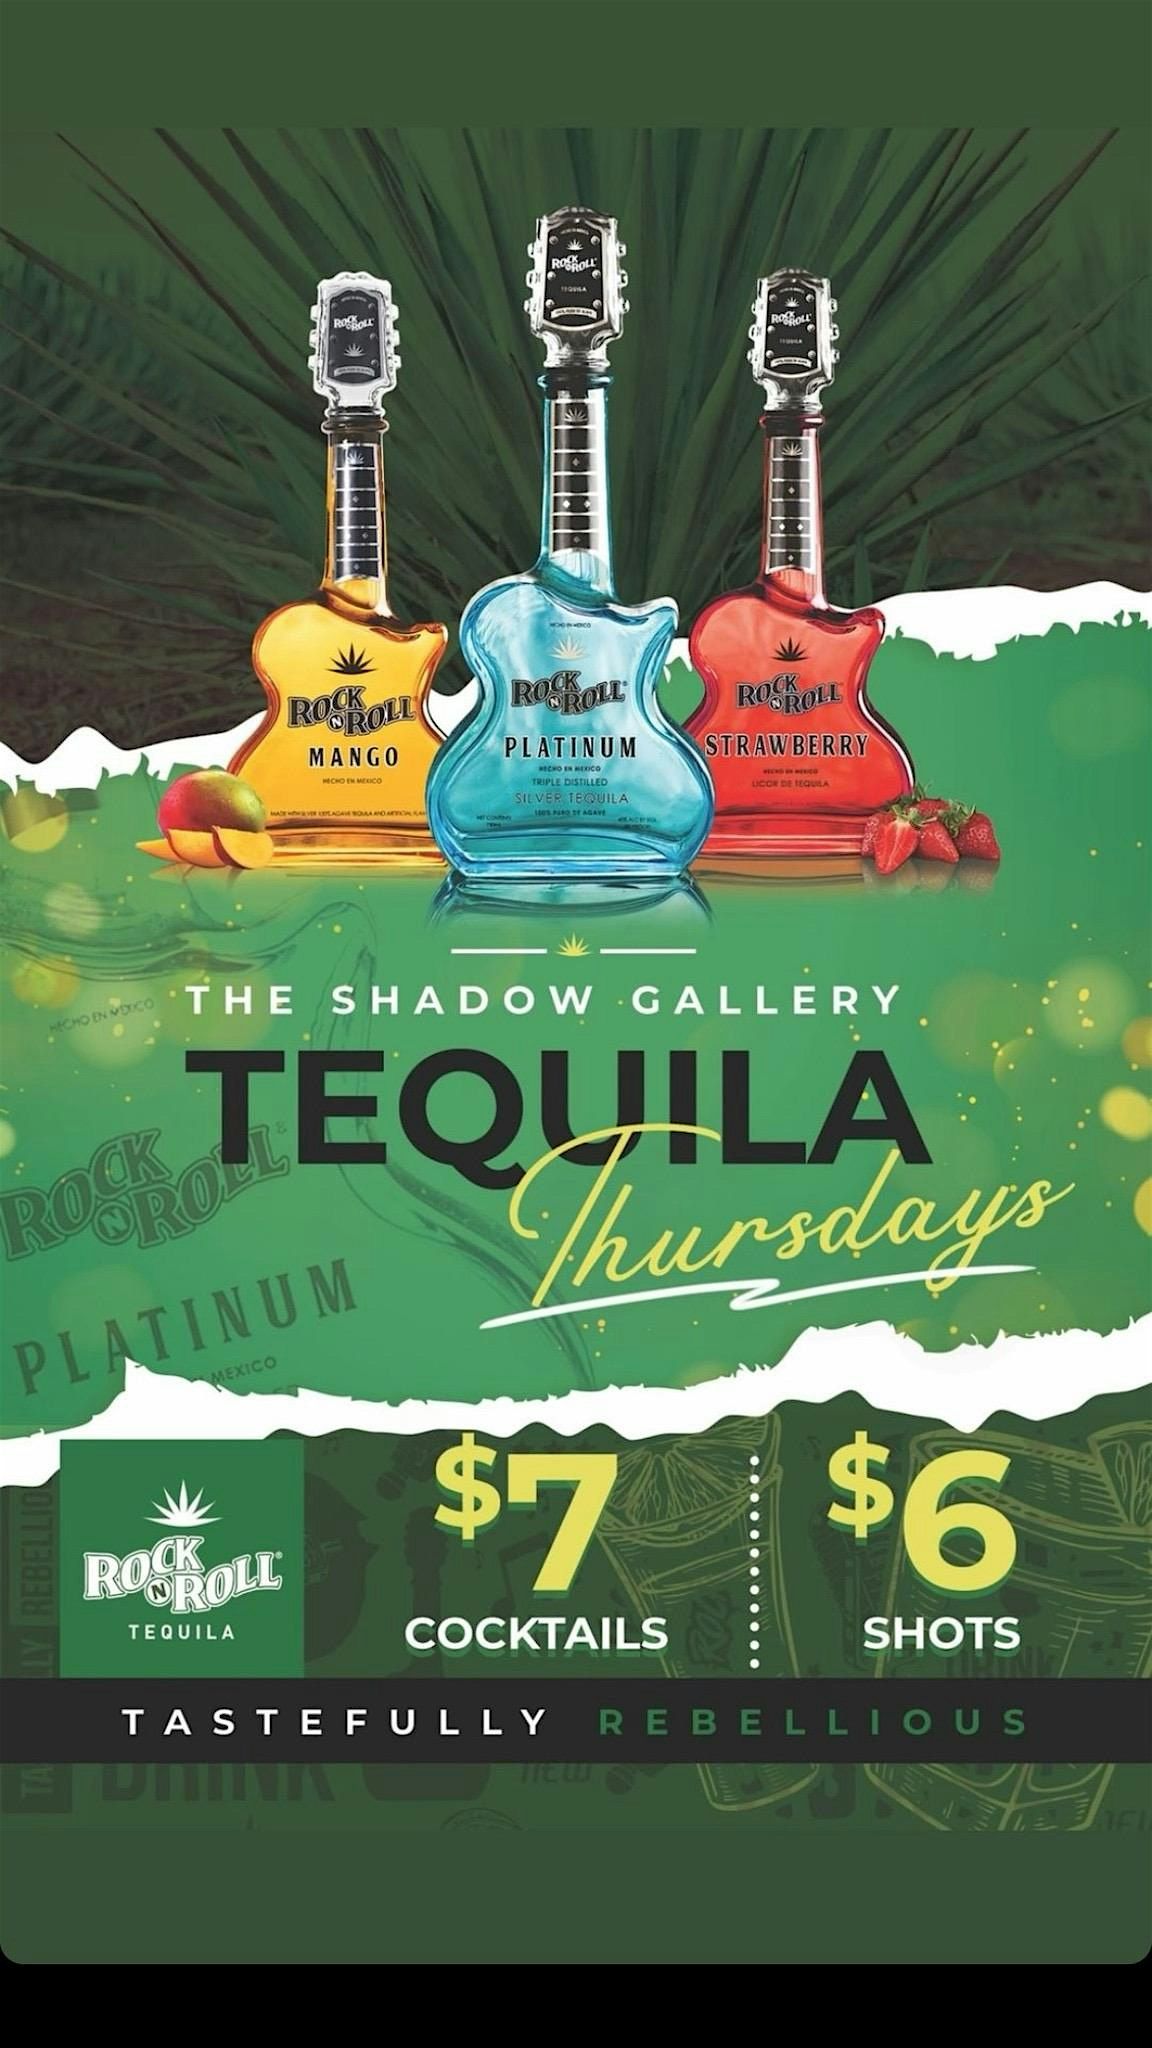 Tequila Thursdays at The Shadow Gallery!